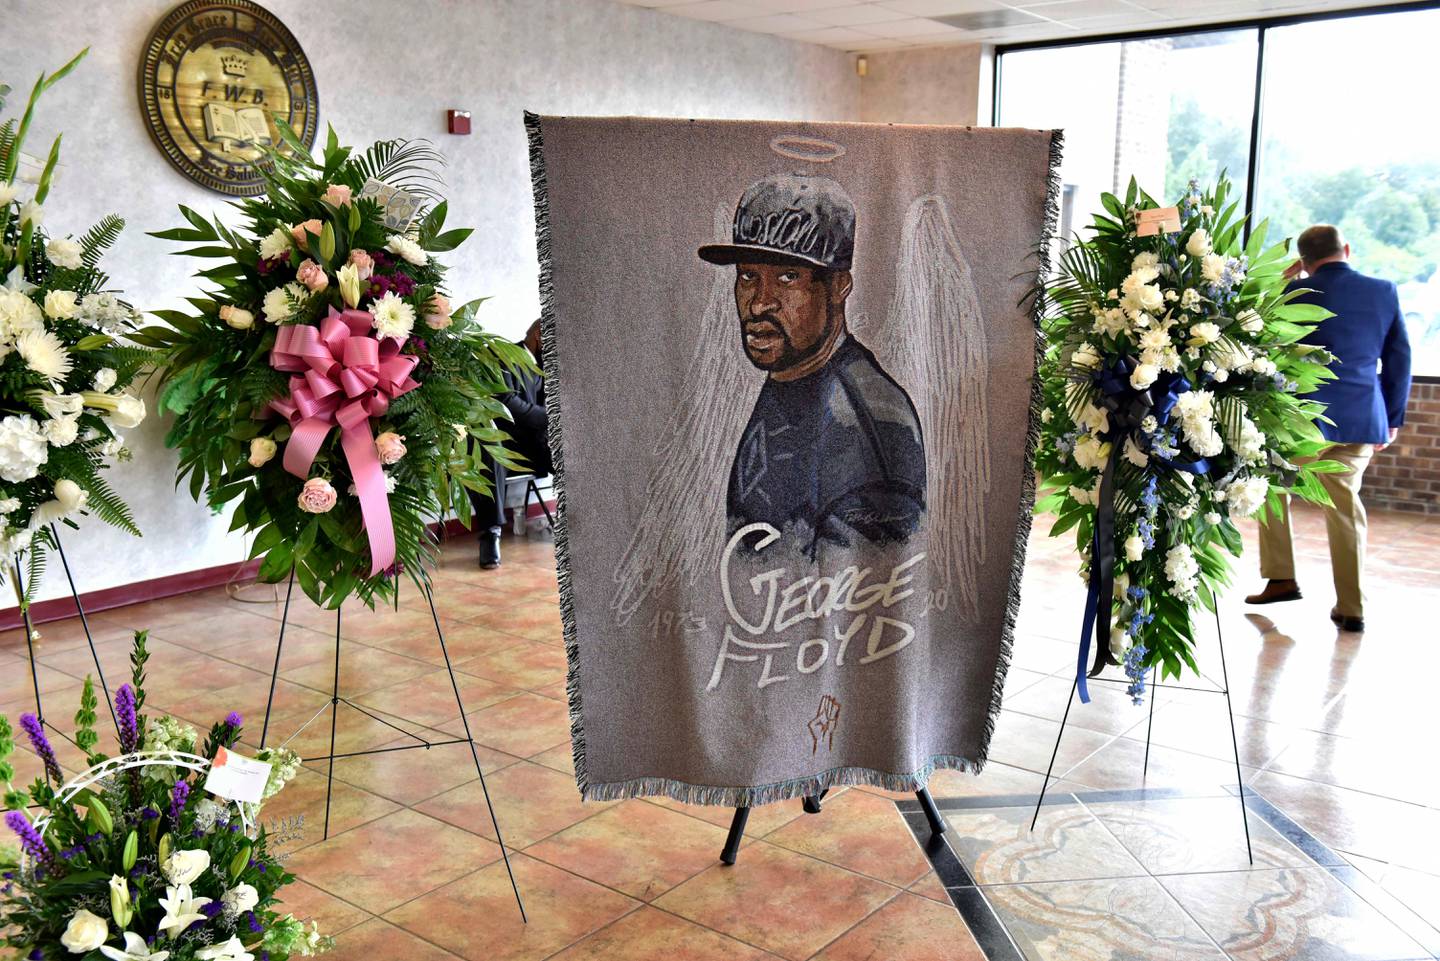 A picture of George Floyd and flowers are set up for a memorial service for Floyd, Saturday, June 6, 2020, in Raeford, N.C. Floyd died after being restrained by Minneapolis police officers on May 25.  (Ed Clemente/The Fayetteville Observer via AP, Pool)